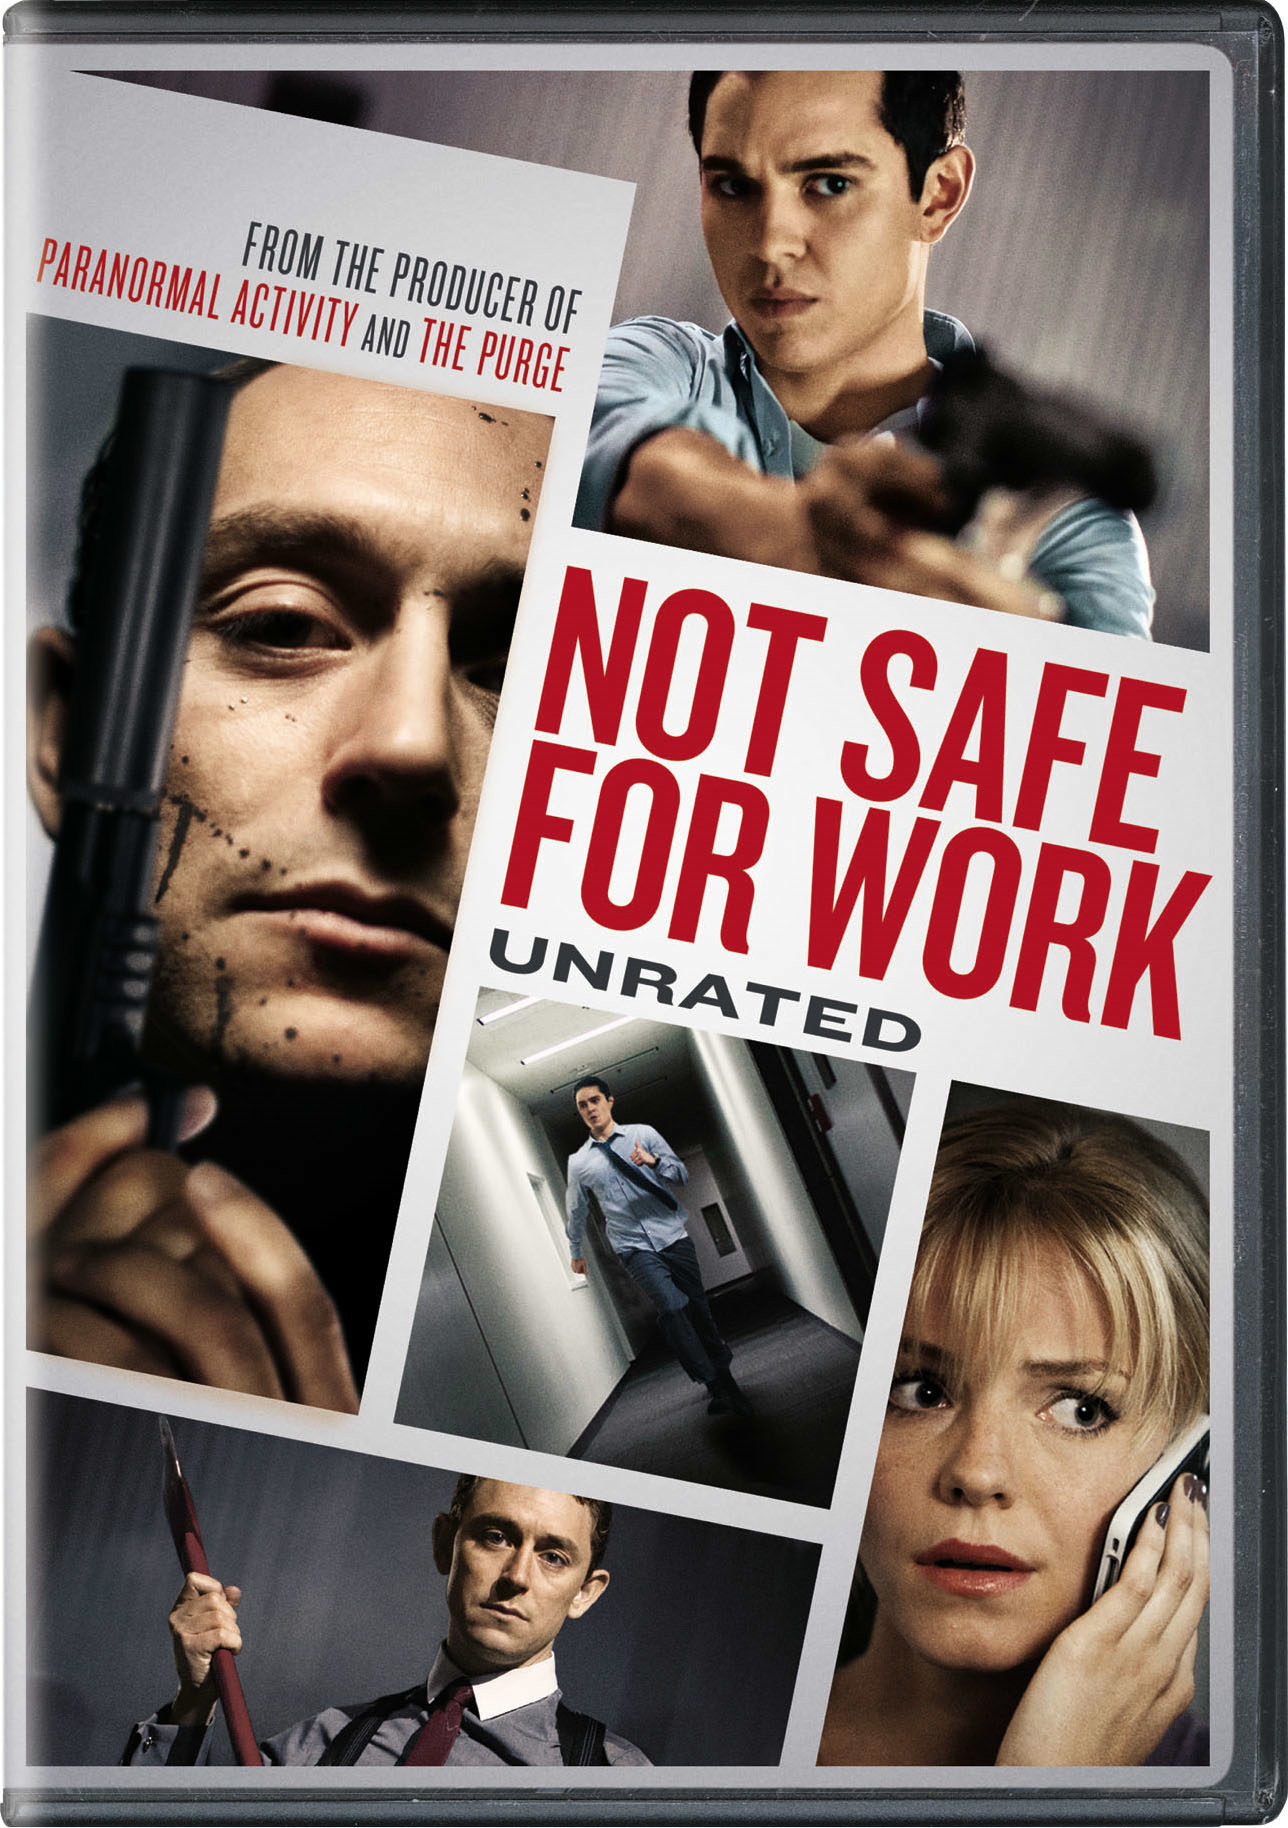 Not Safe For Work - DVD [ 2014 ]  - Thriller Movies On DVD - Movies On GRUV